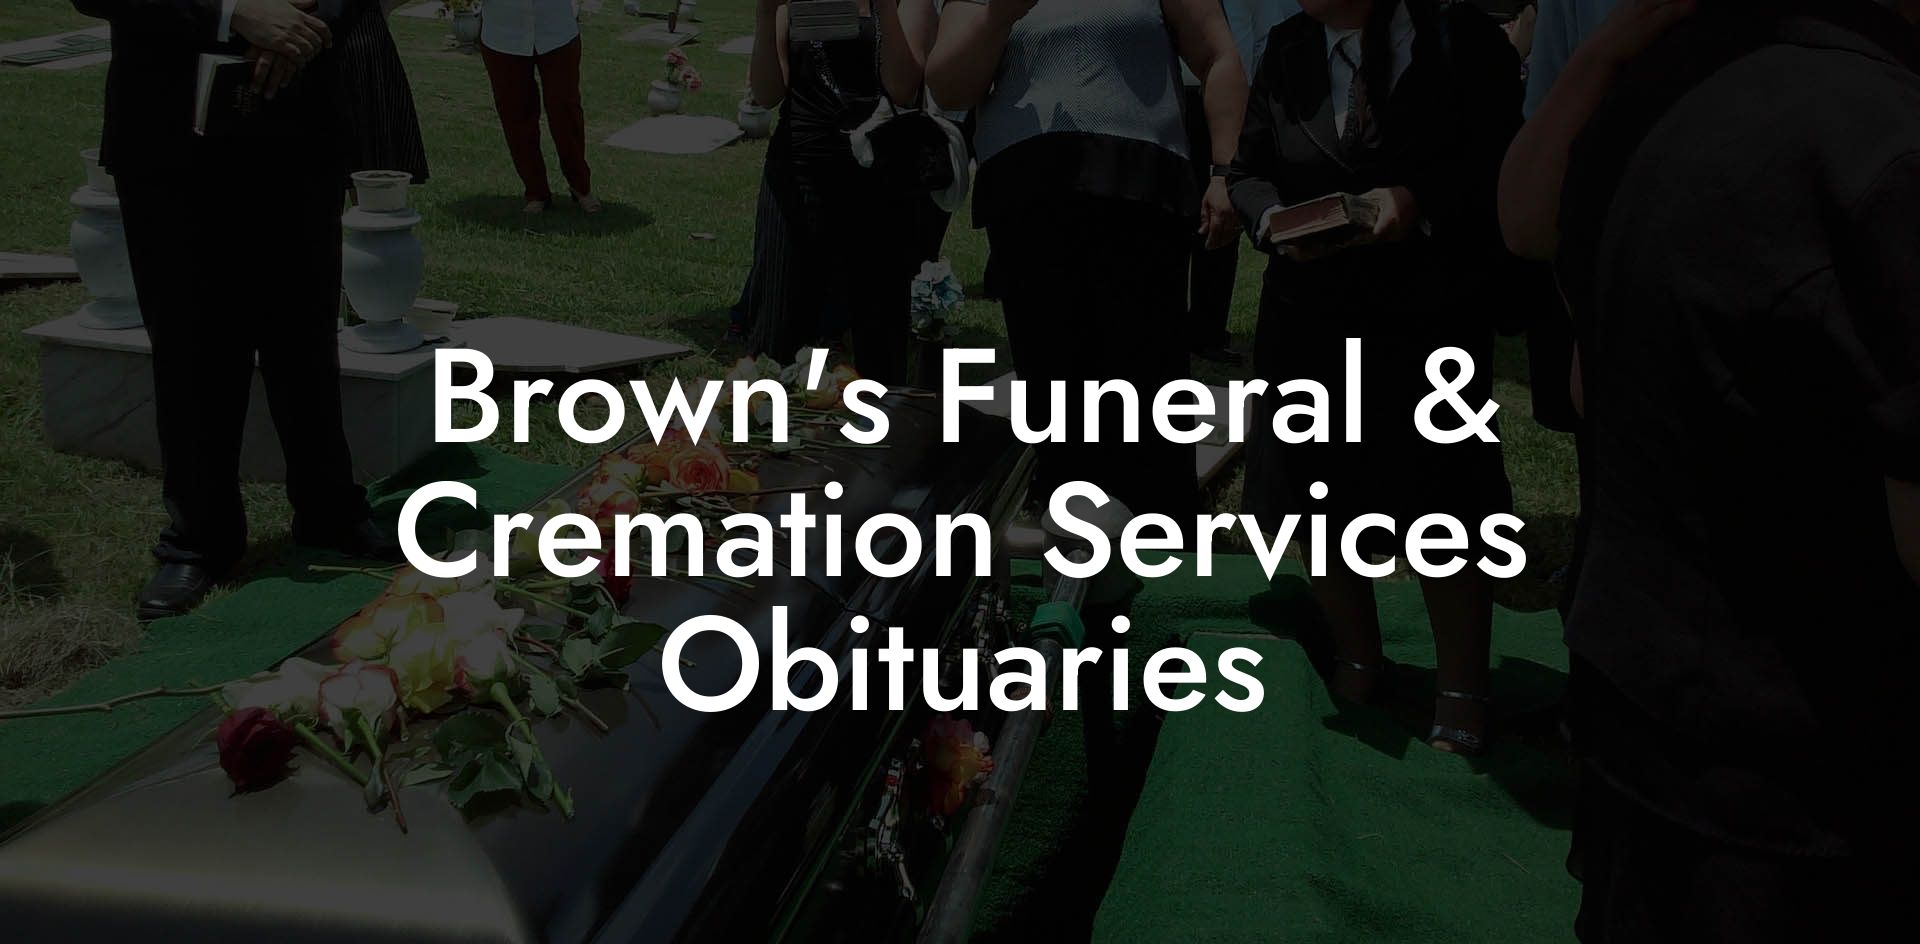 Brown's Funeral & Cremation Services Obituaries